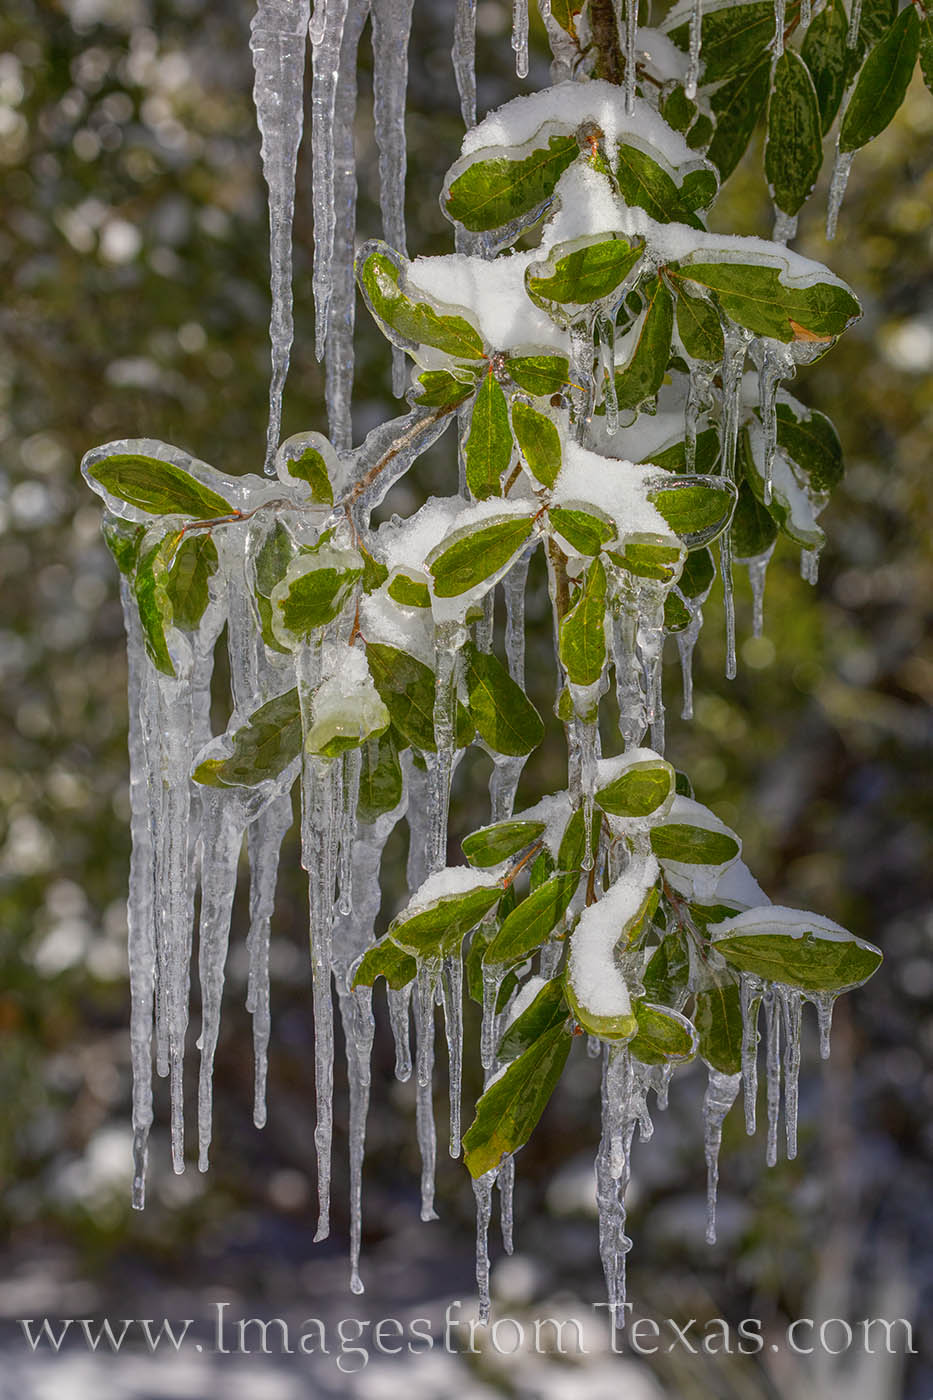 From the Snowpocalypse of February, 2021, ice hangs on the leaves and branches of a frozen tree in the hill Country.